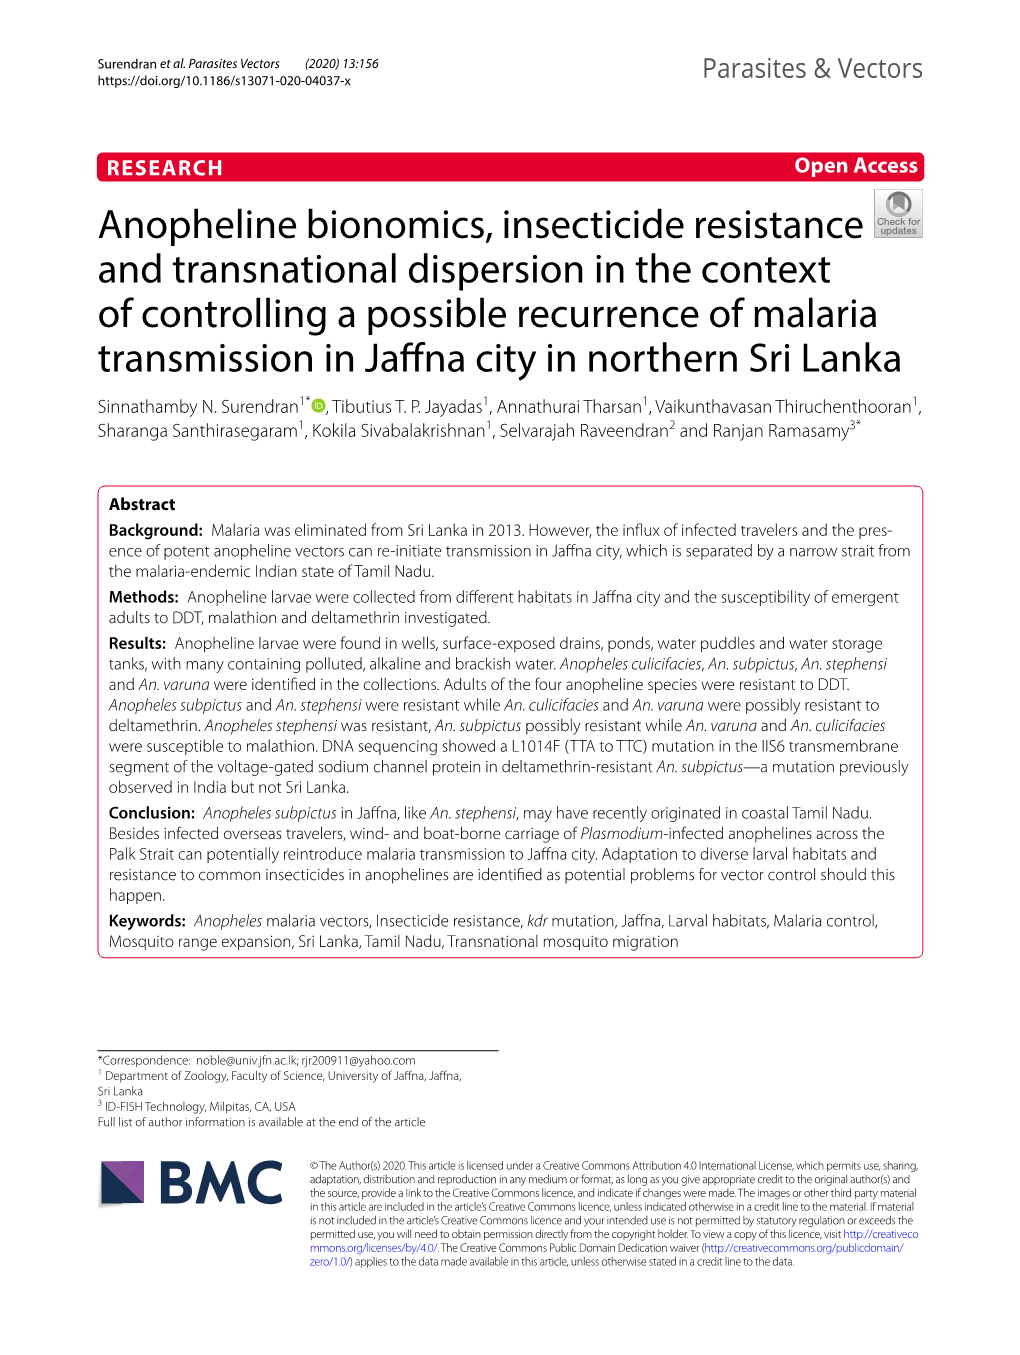 Anopheline Bionomics, Insecticide Resistance and Transnational